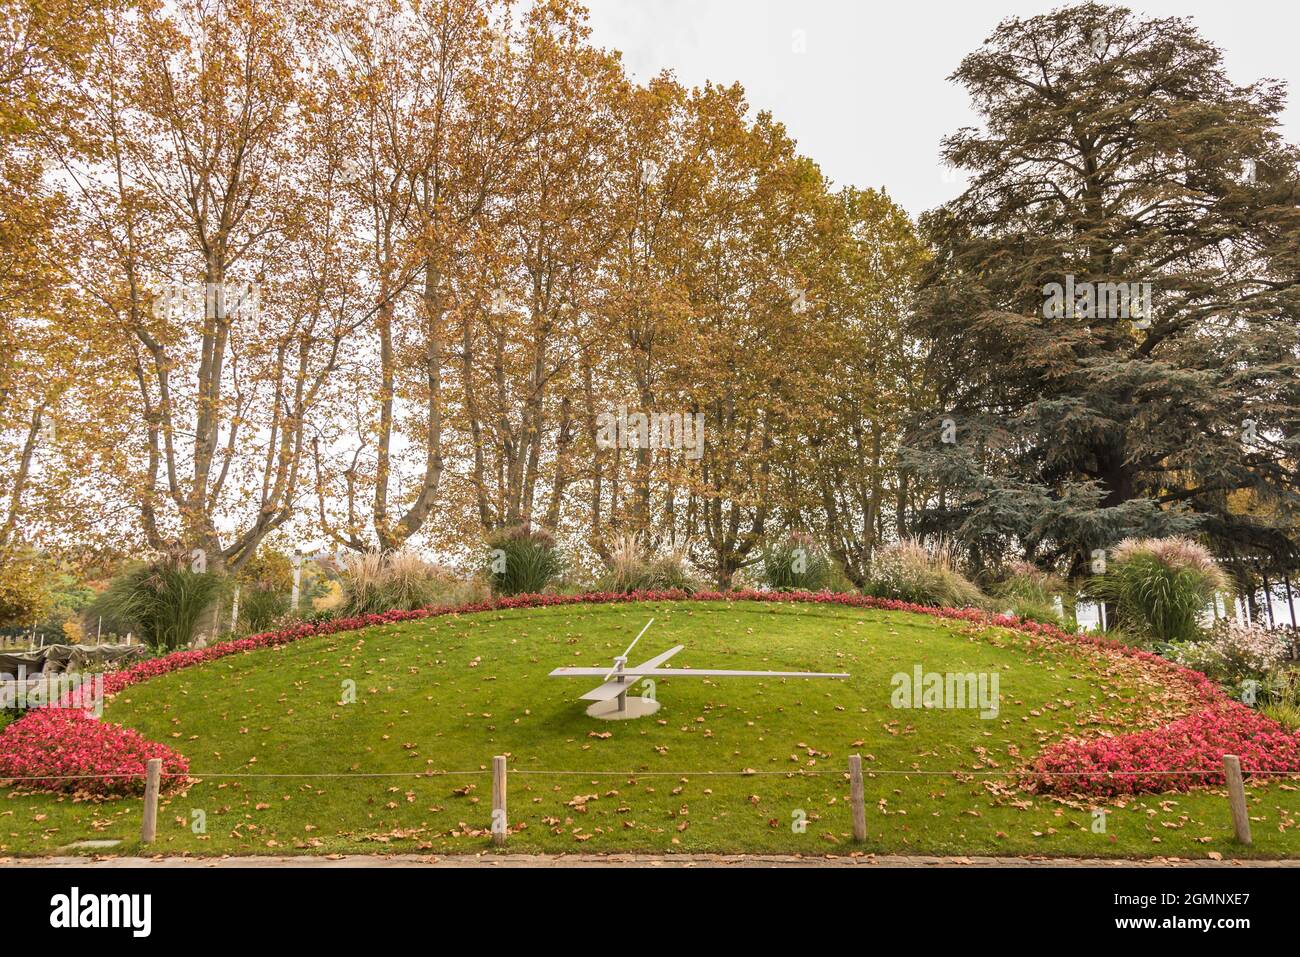 A flower clock on lawn on a park with many trees around at day. Lausanne, Switzerland Stock Photo